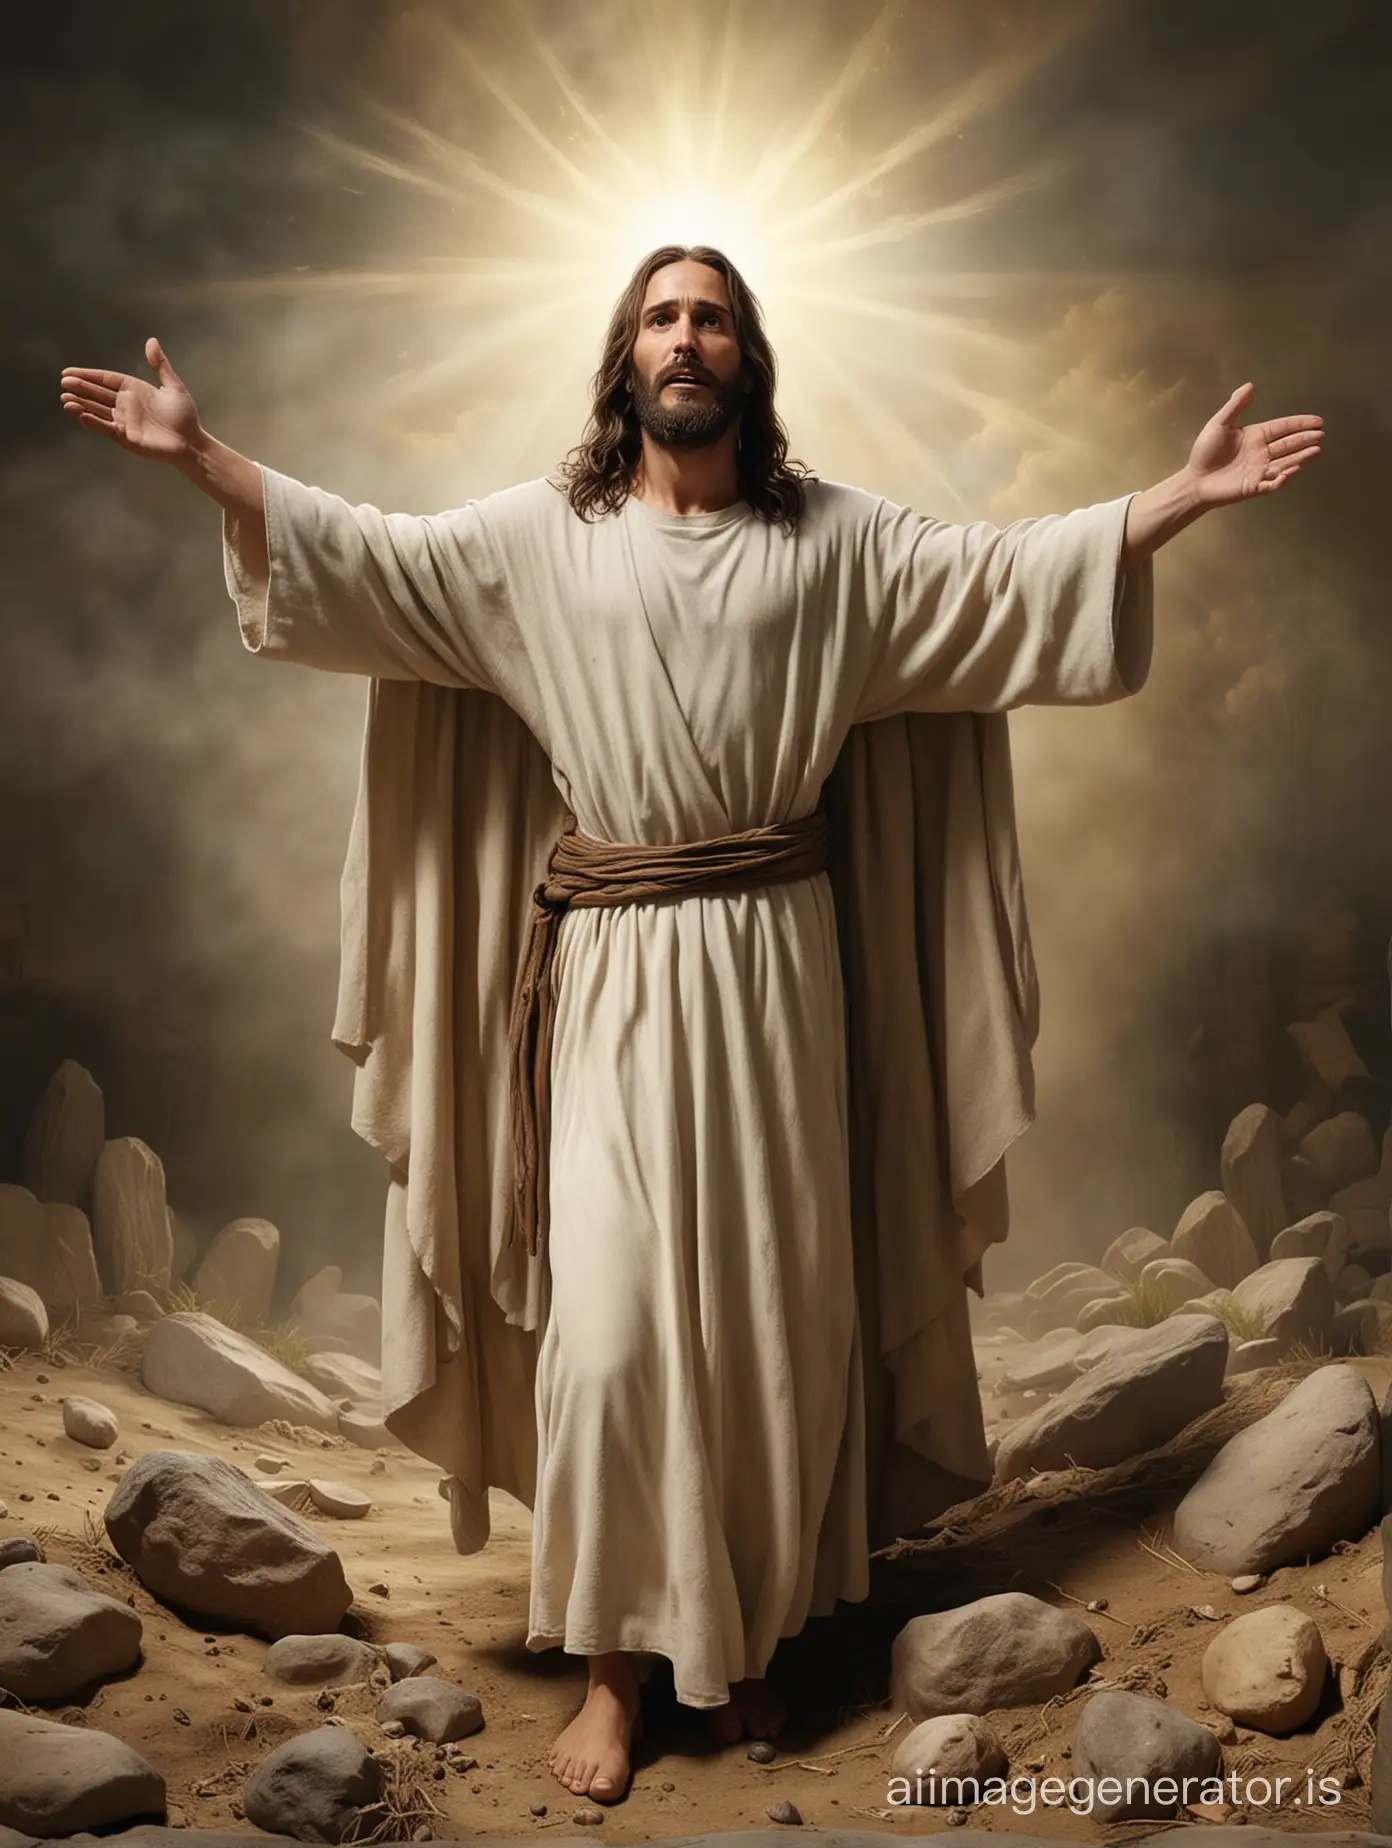 Realistic-Depiction-of-Jesus-Resurrection-with-Outstretched-Arms